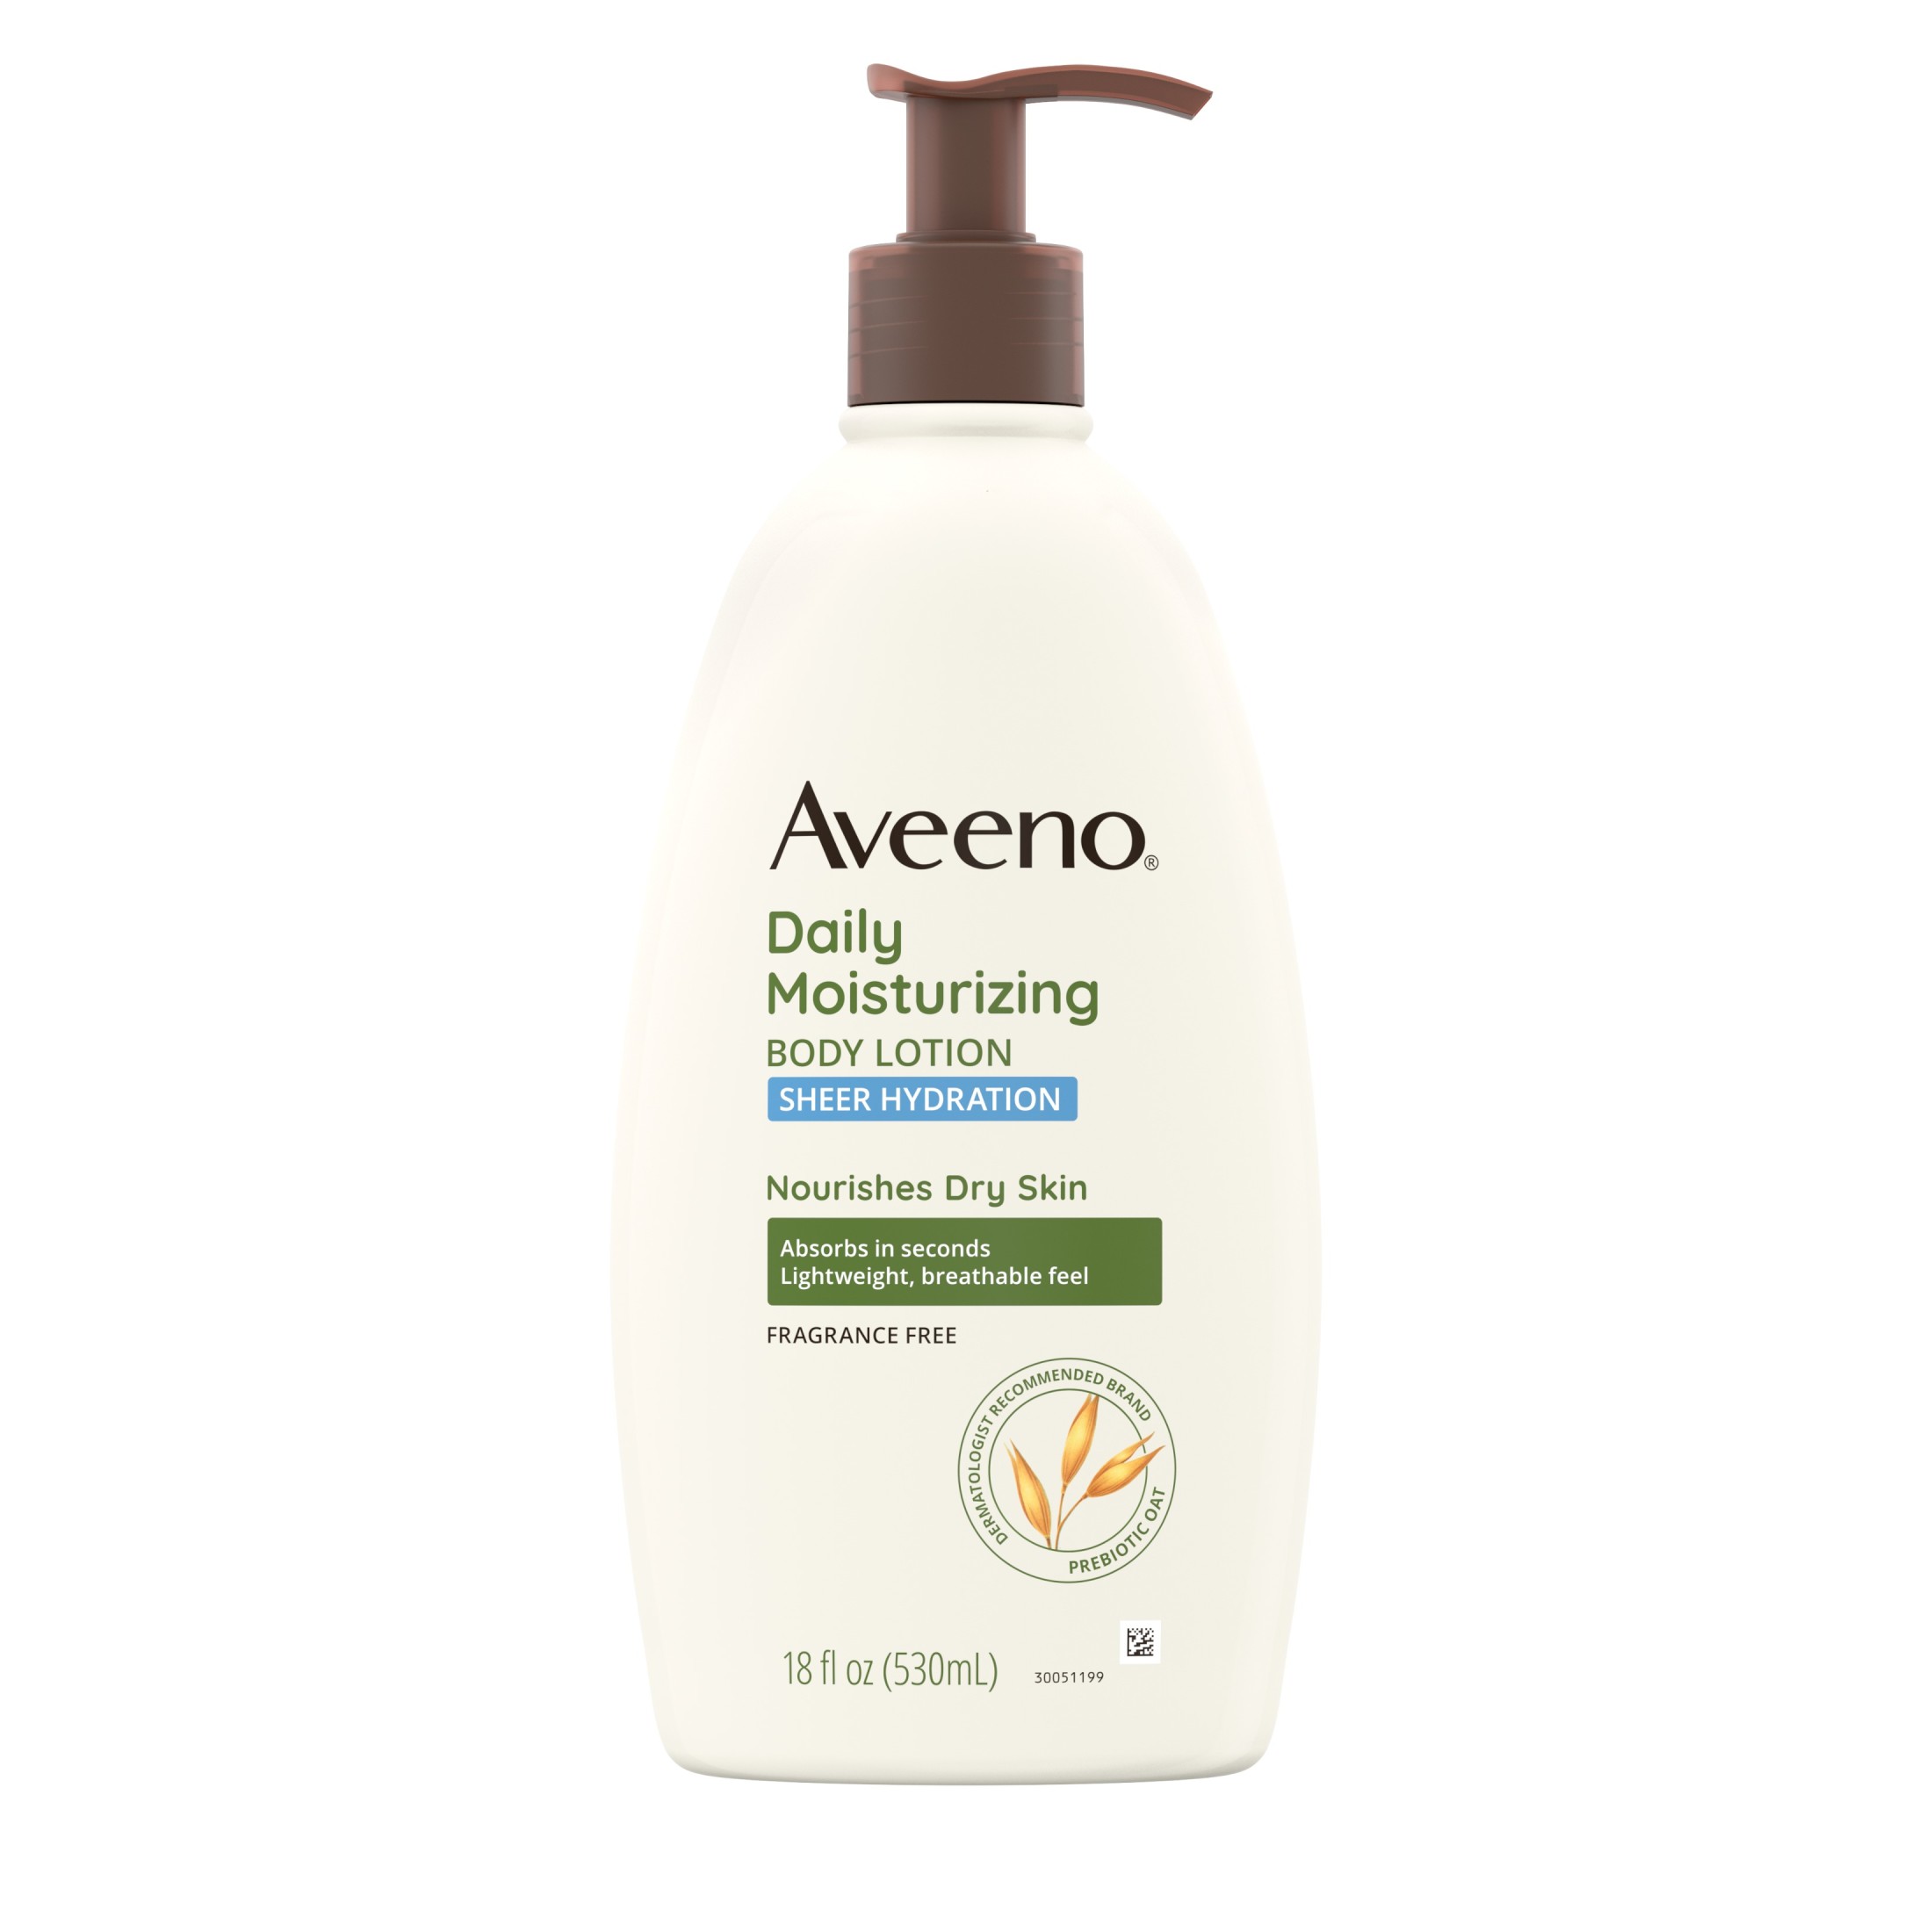 Aveeno Daily Moisturizing Body Lotion with Oat for Dry Skin, 18 fl oz - image 3 of 11